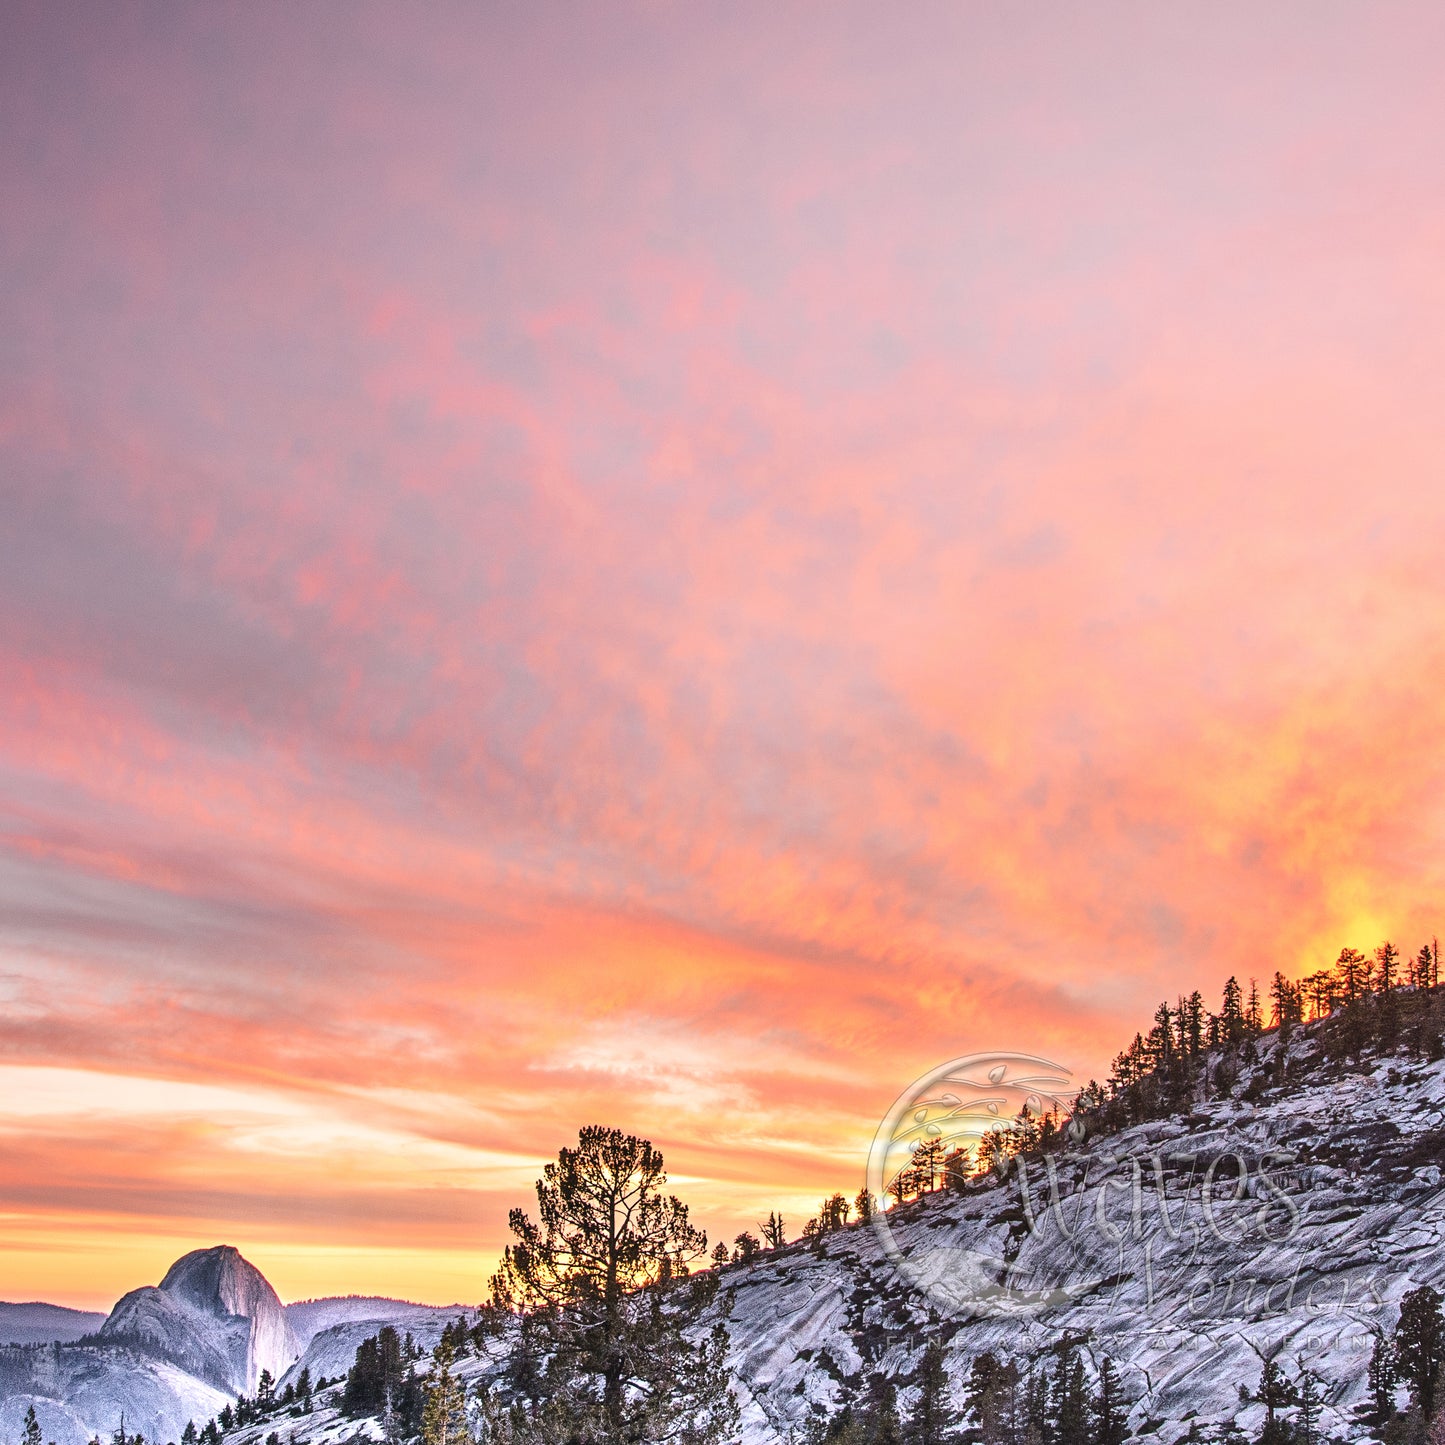 a sunset over a snowy mountain with trees in the foreground